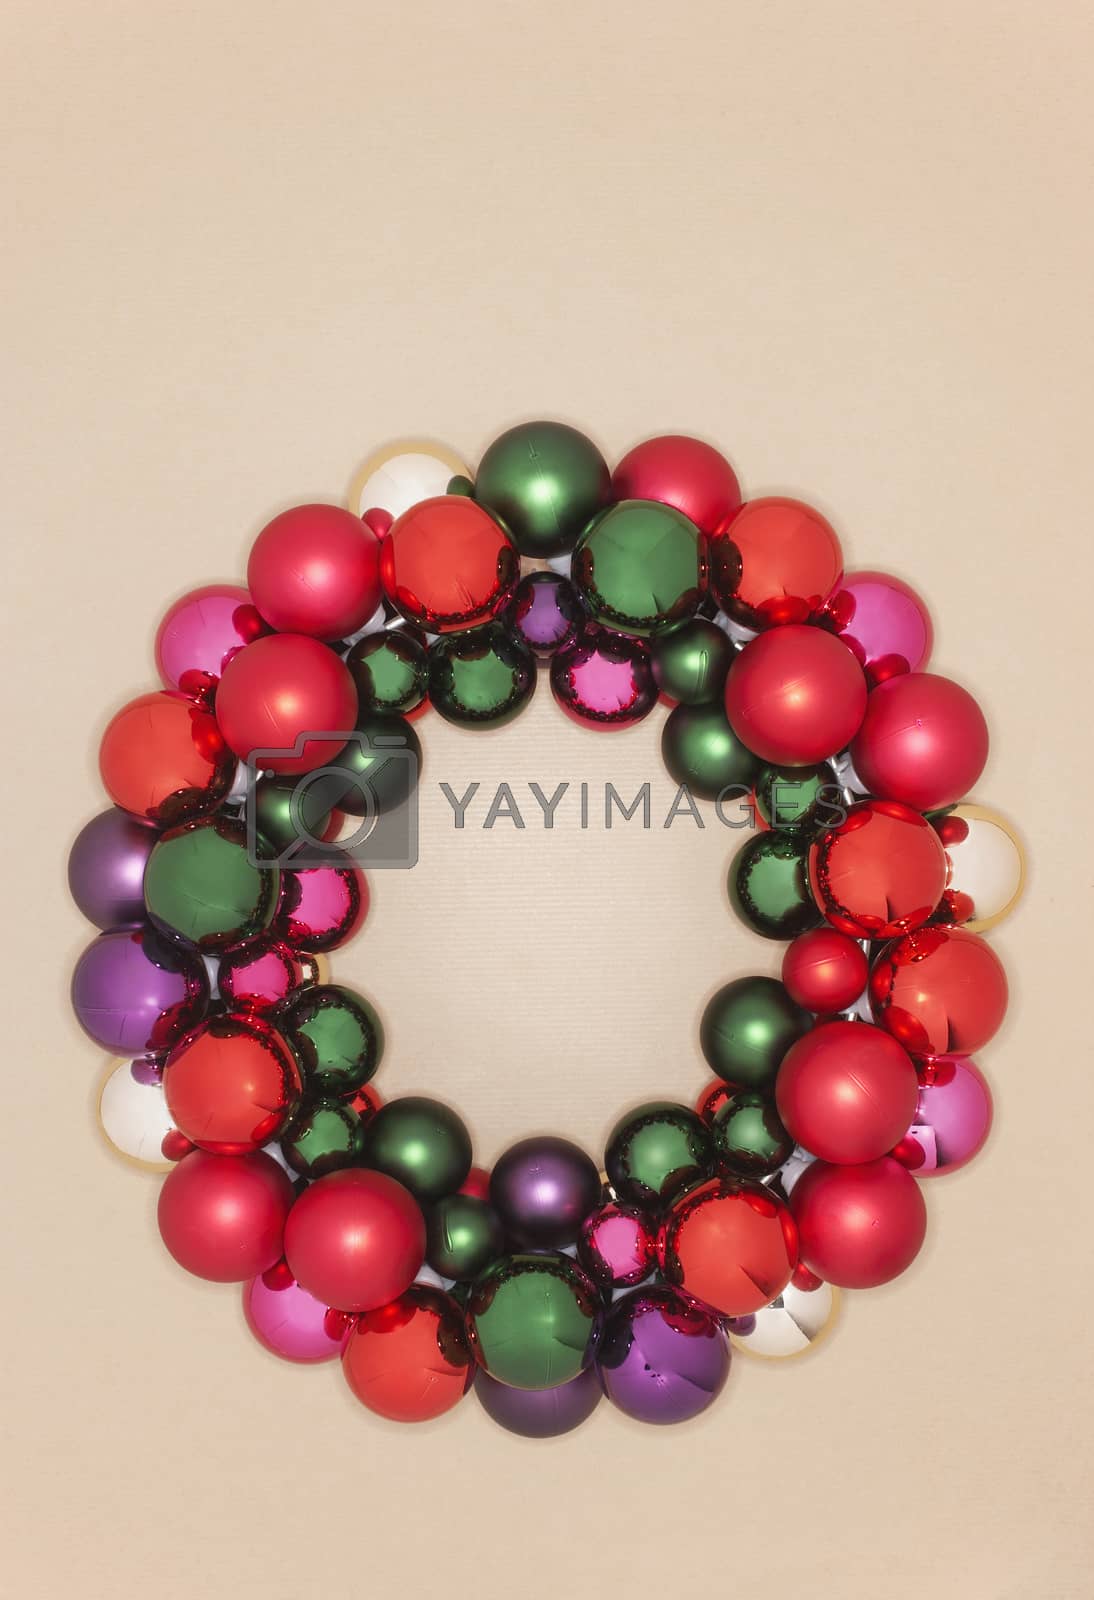 Royalty free image of Closeup of Christmas wreath over colored background by moodboard